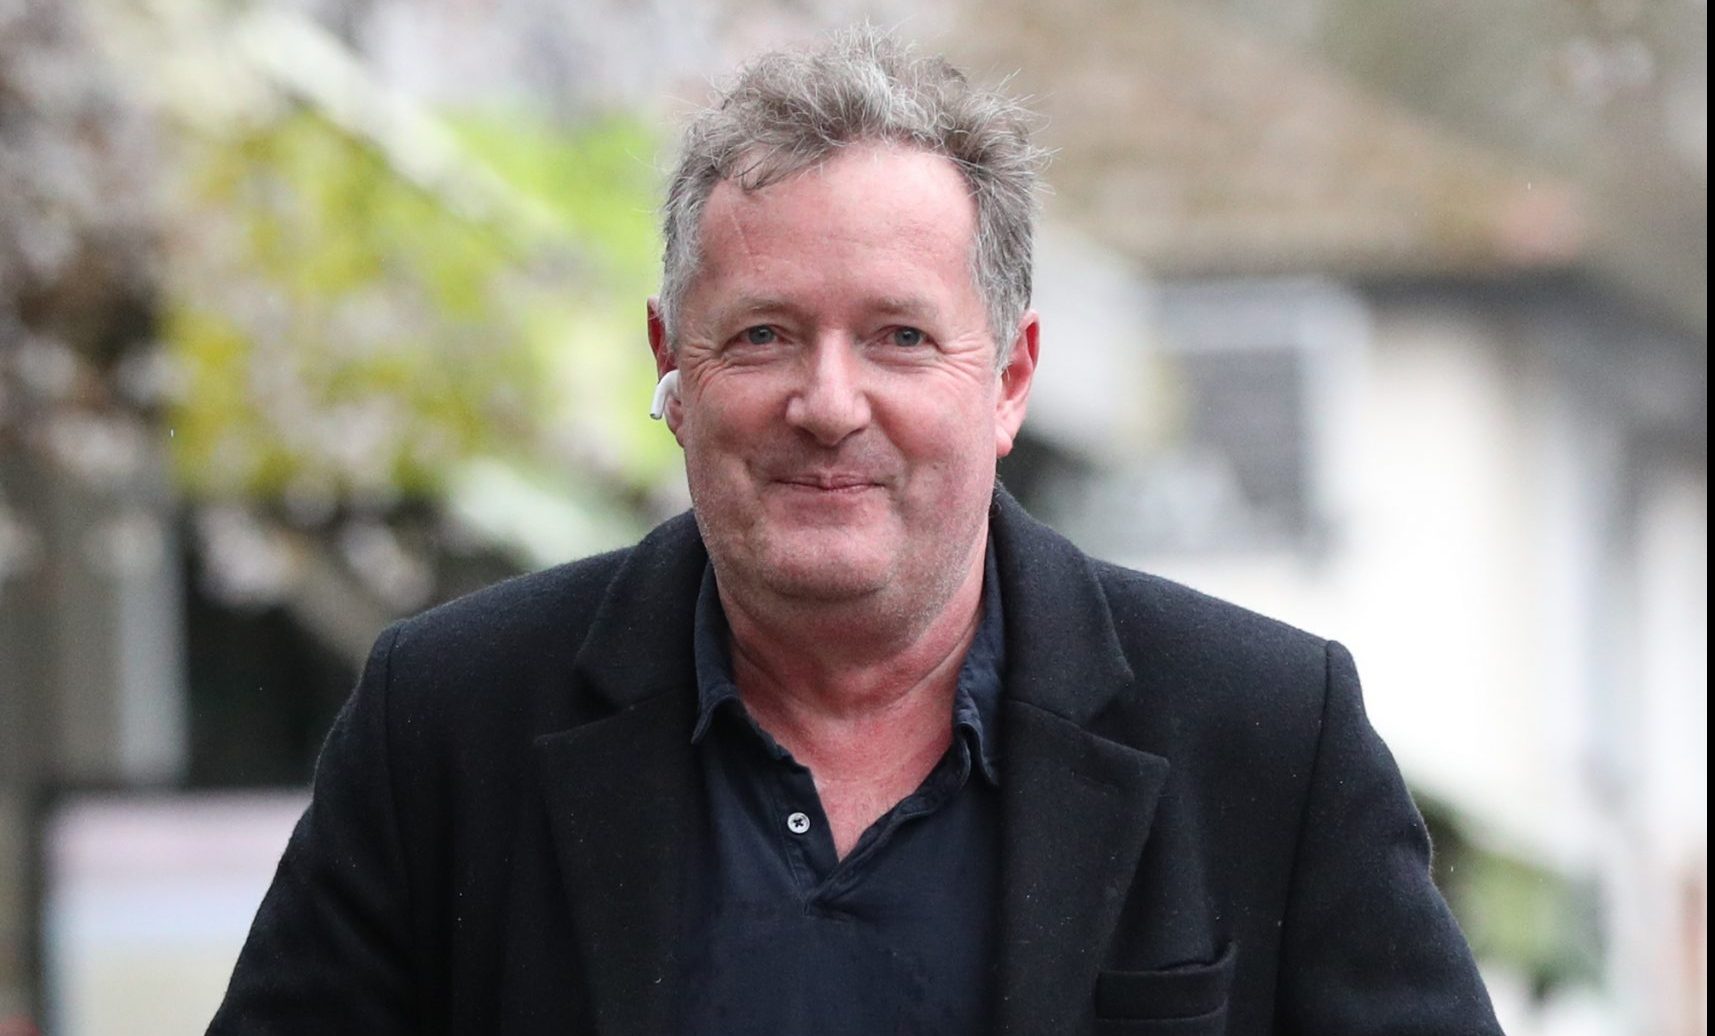 Piers Morgan accuses Adele of exploiting her ‘son’s pain’ to sell albums